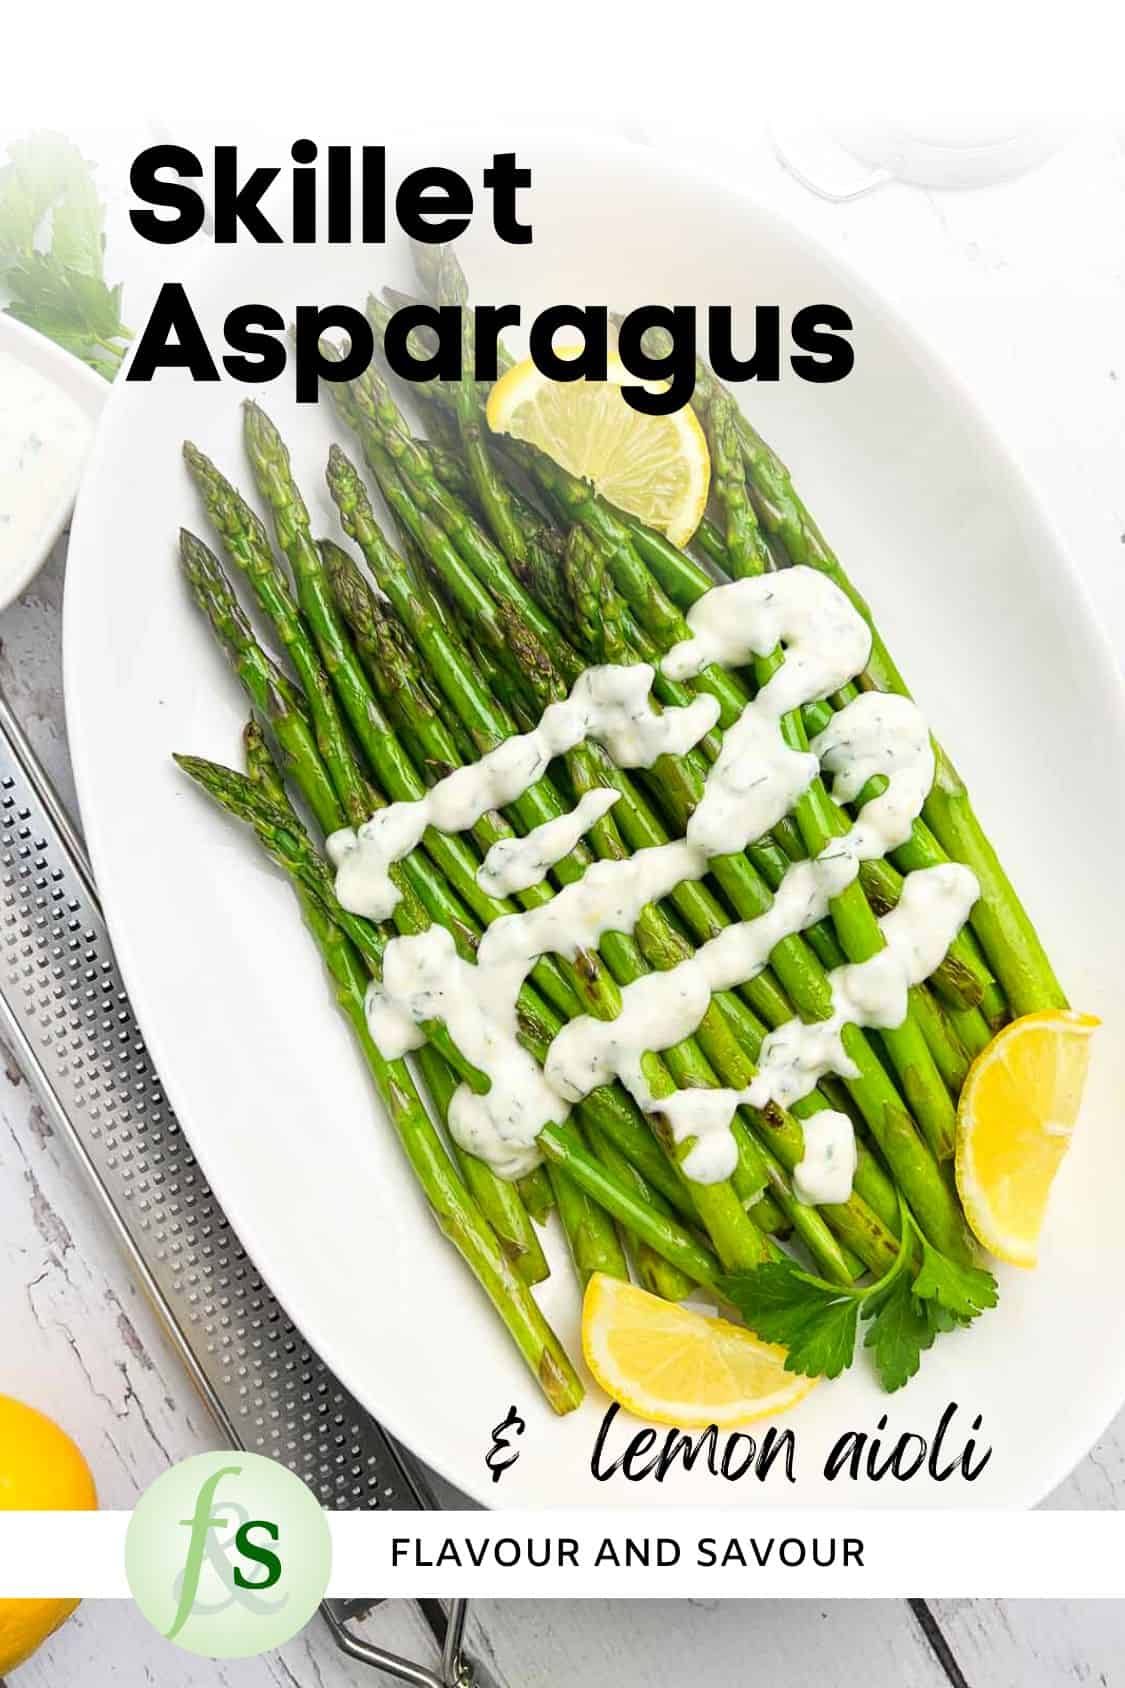 Image with text for skillet asparagus with lemon garlic aioli.